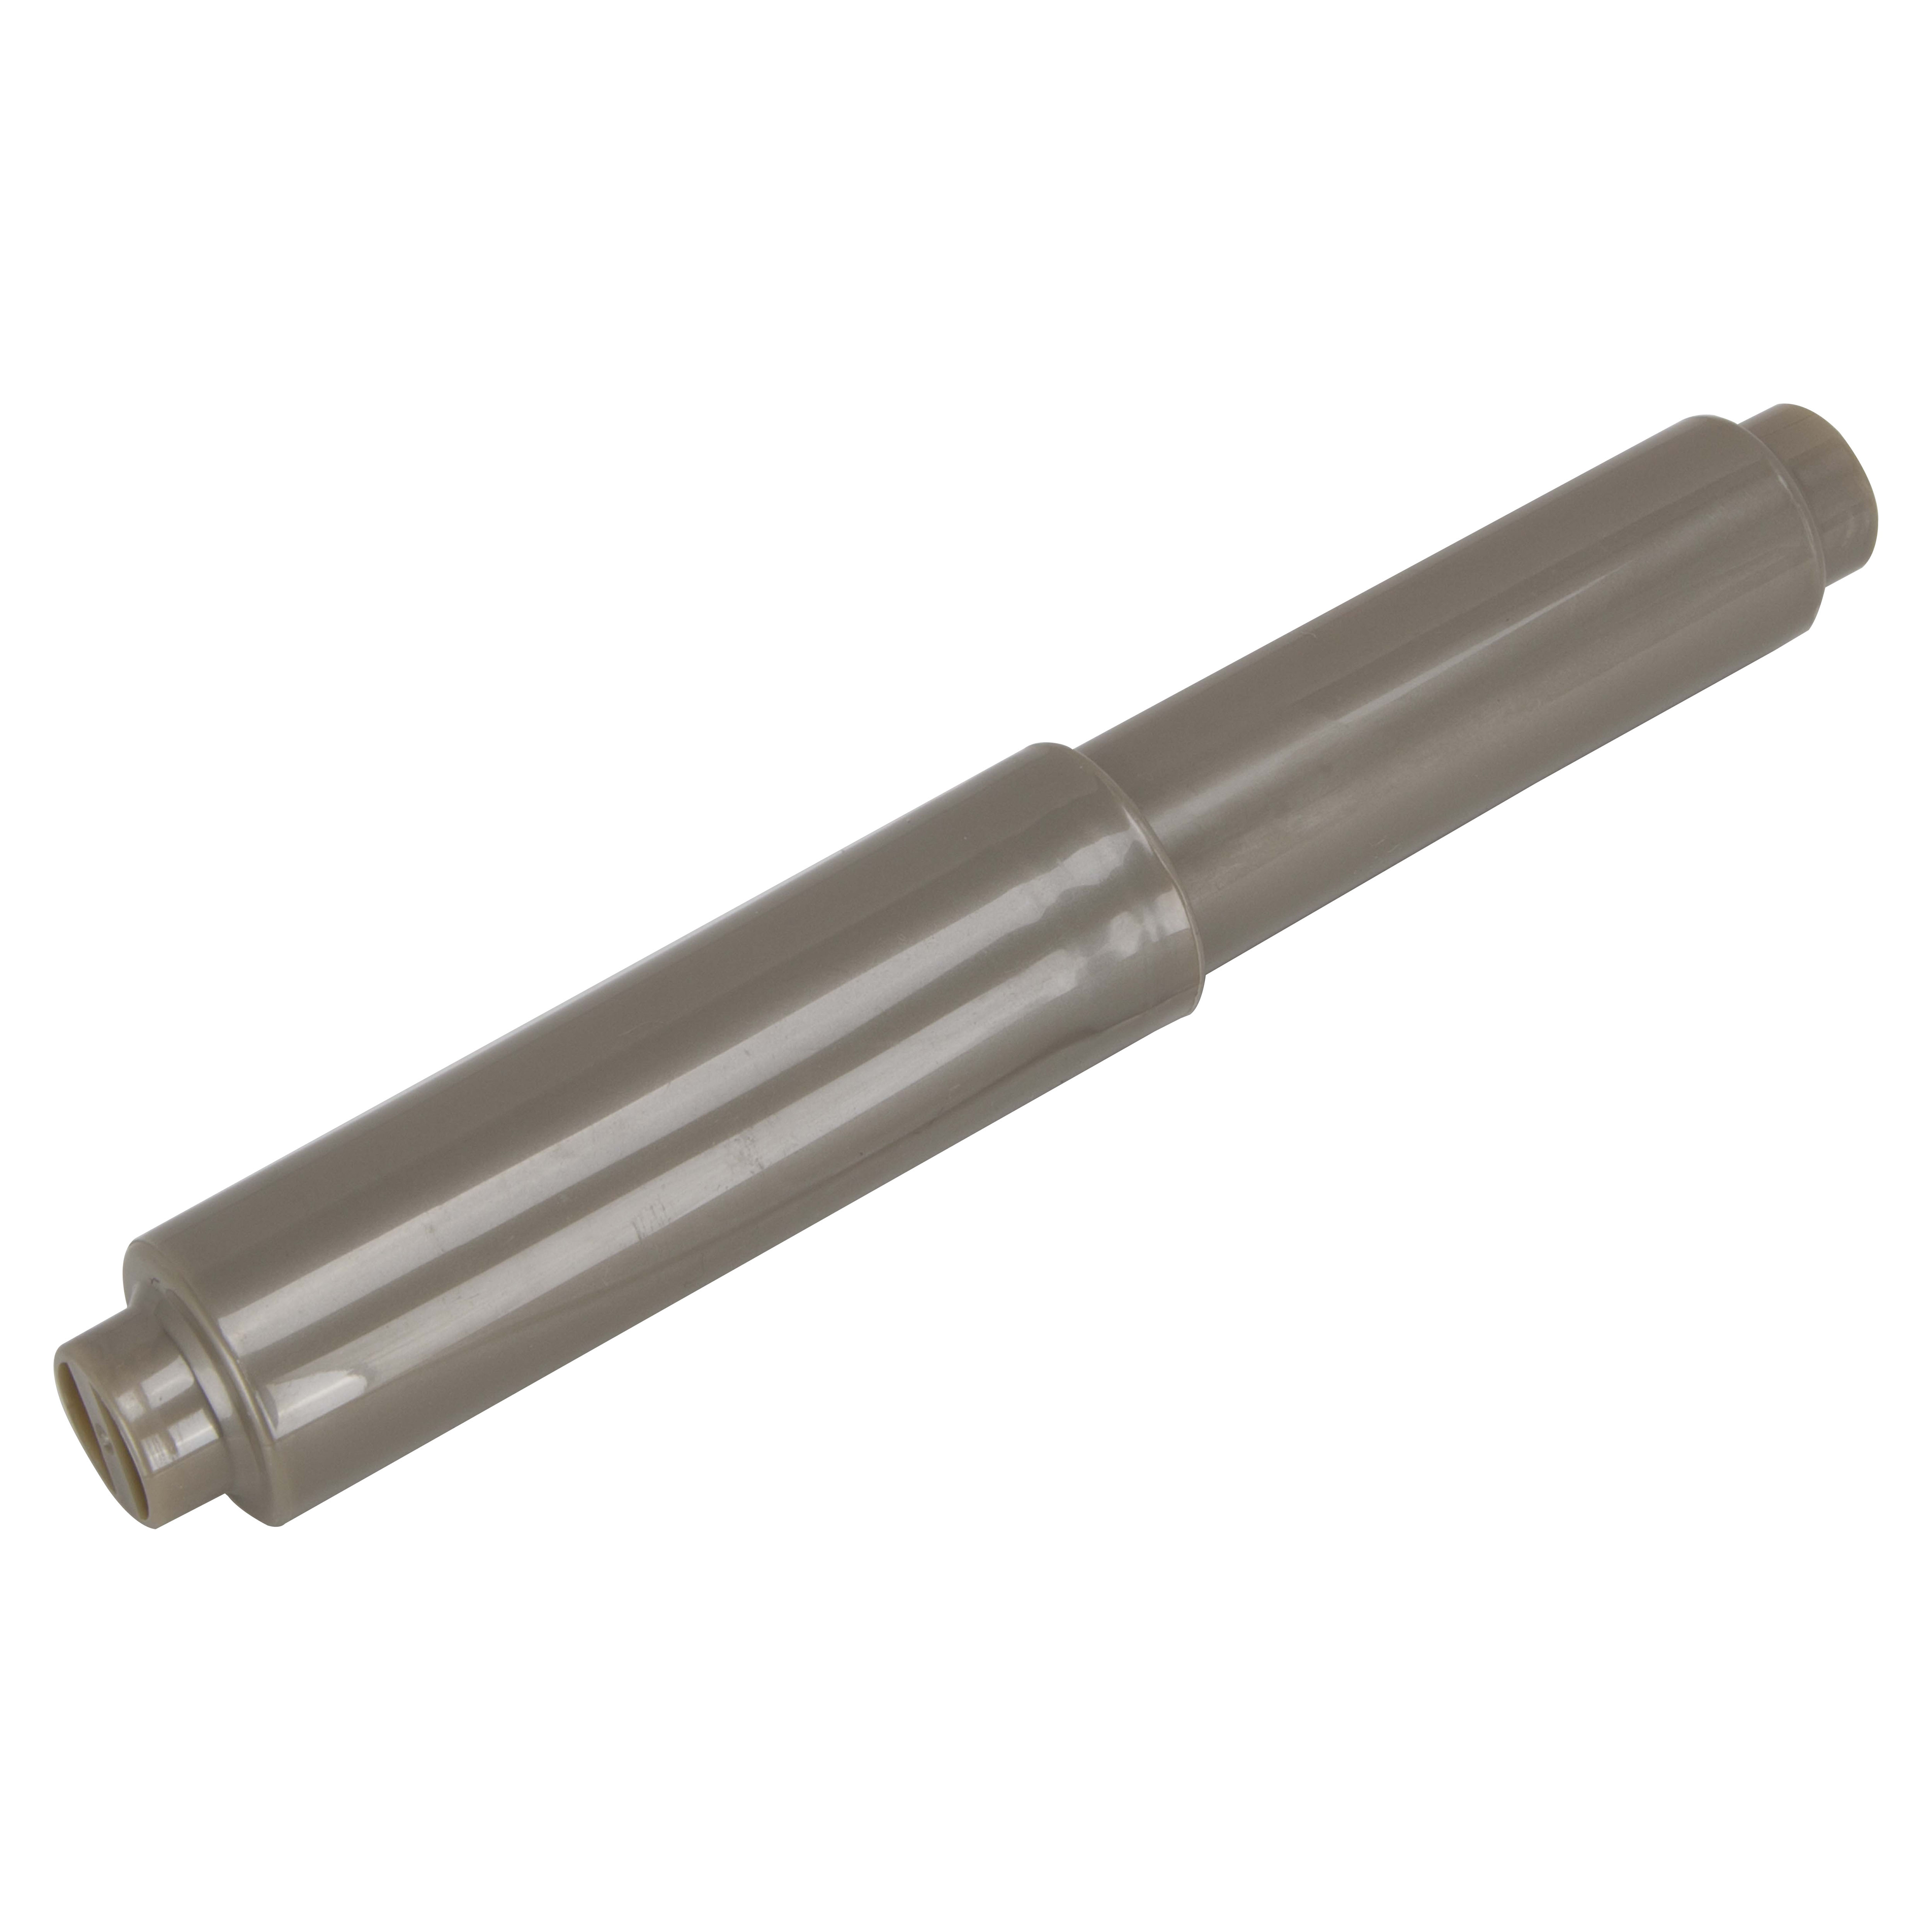 BE02006-07 Paper Roller, Plastic, Brushed Nickel, Wall Mounting